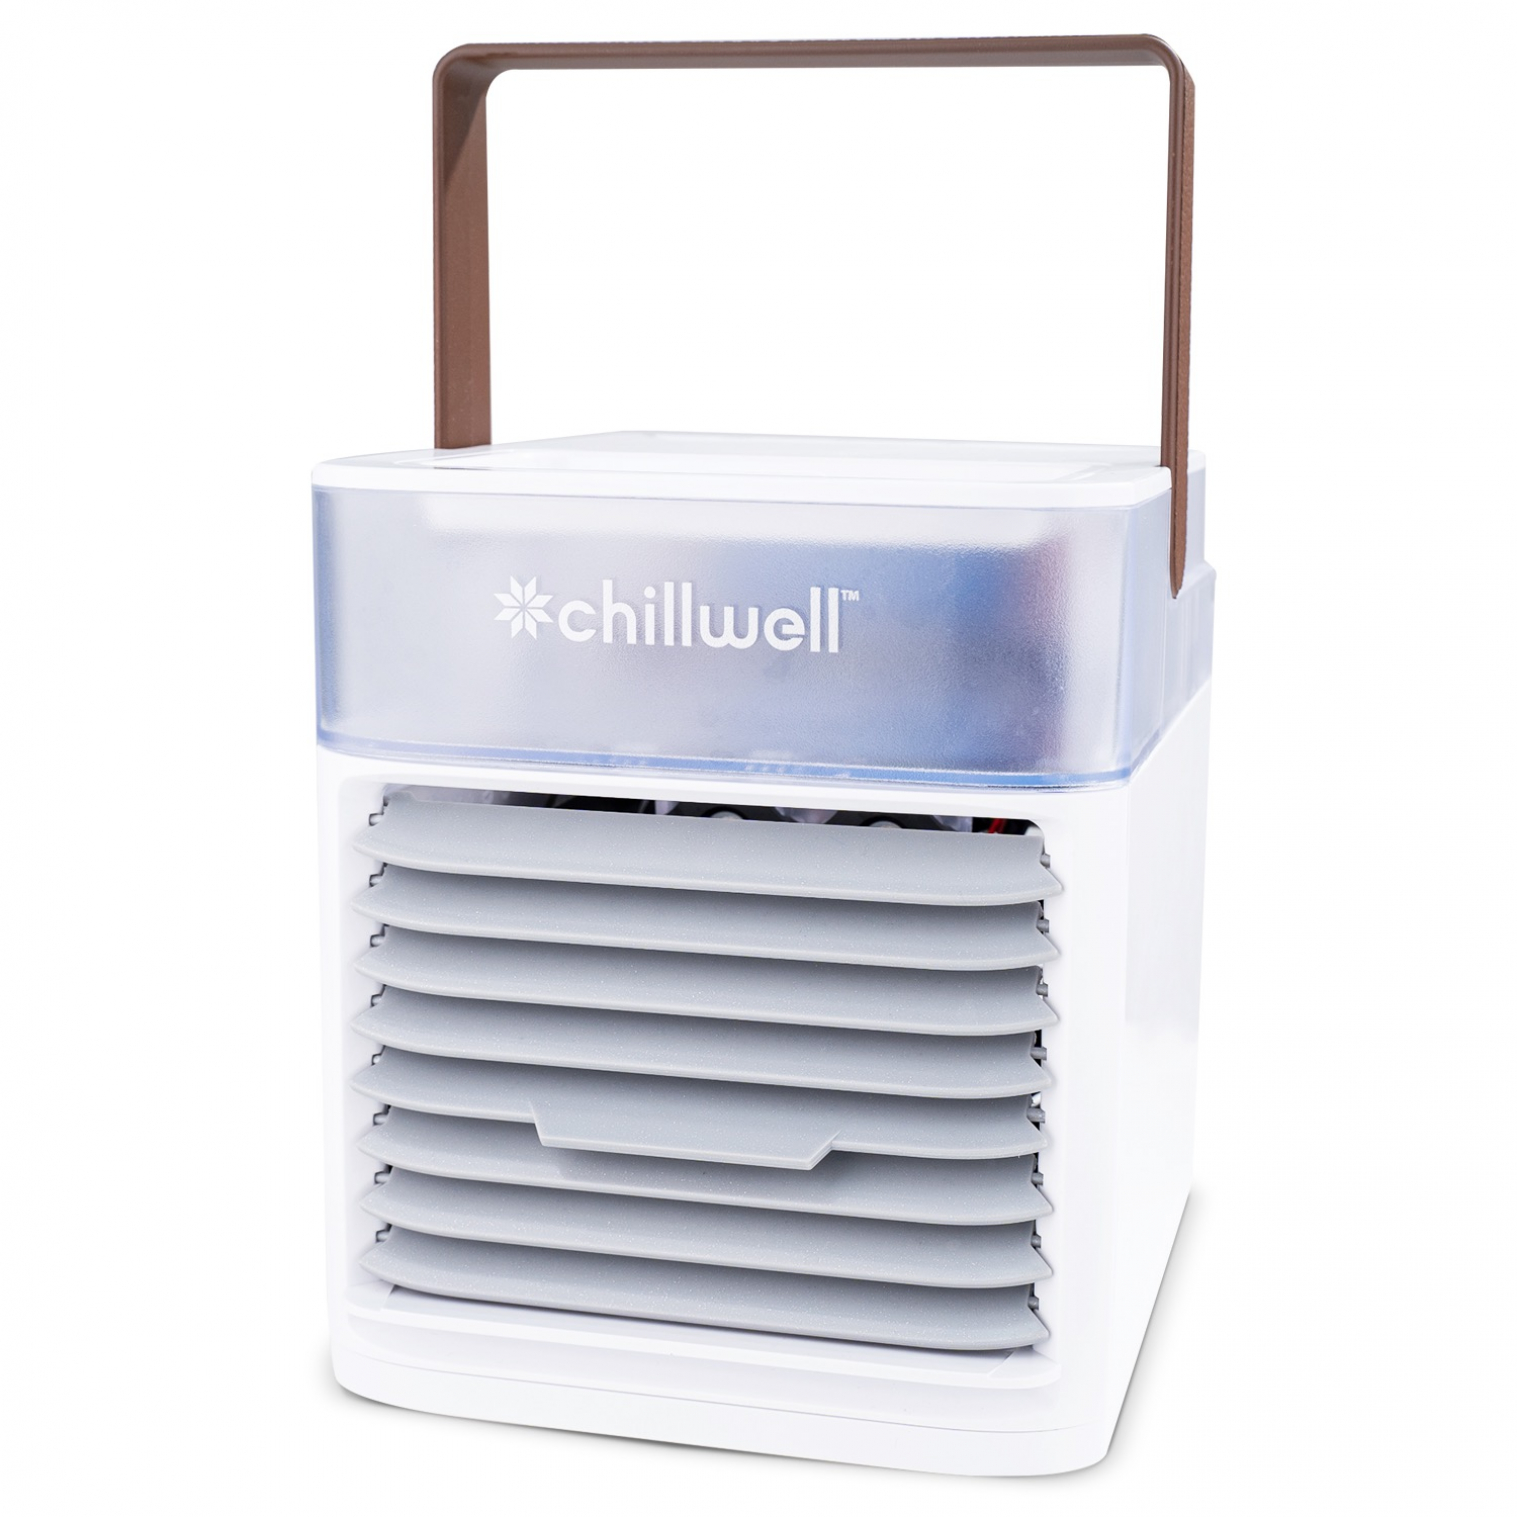 Chillwell AC Room Cooling Unit